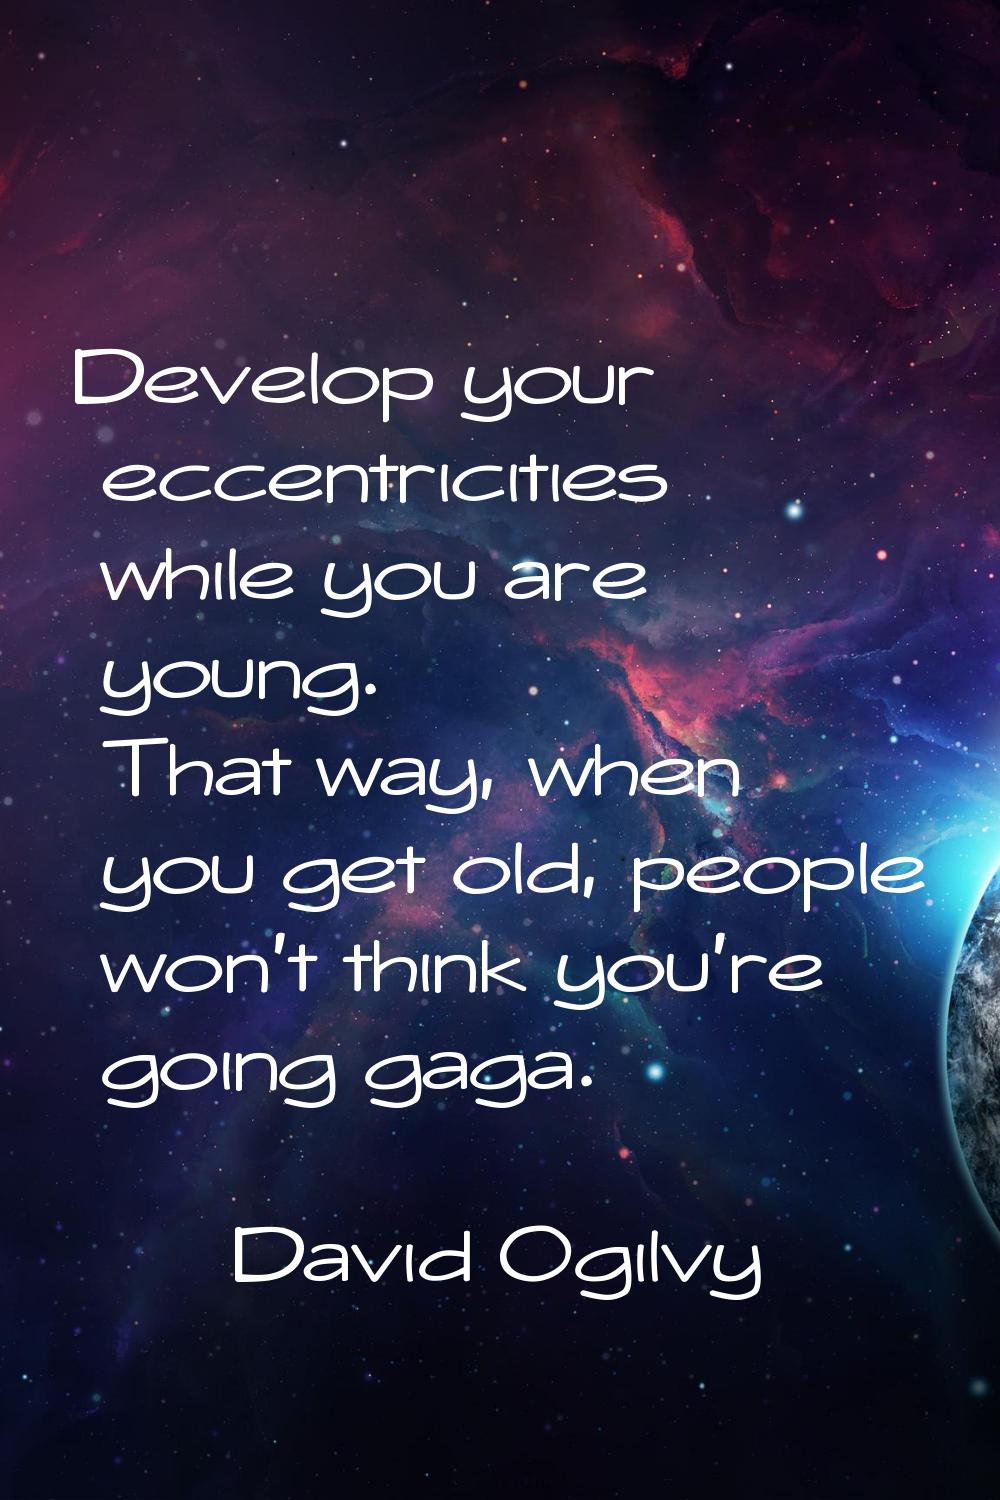 Develop your eccentricities while you are young. That way, when you get old, people won't think you